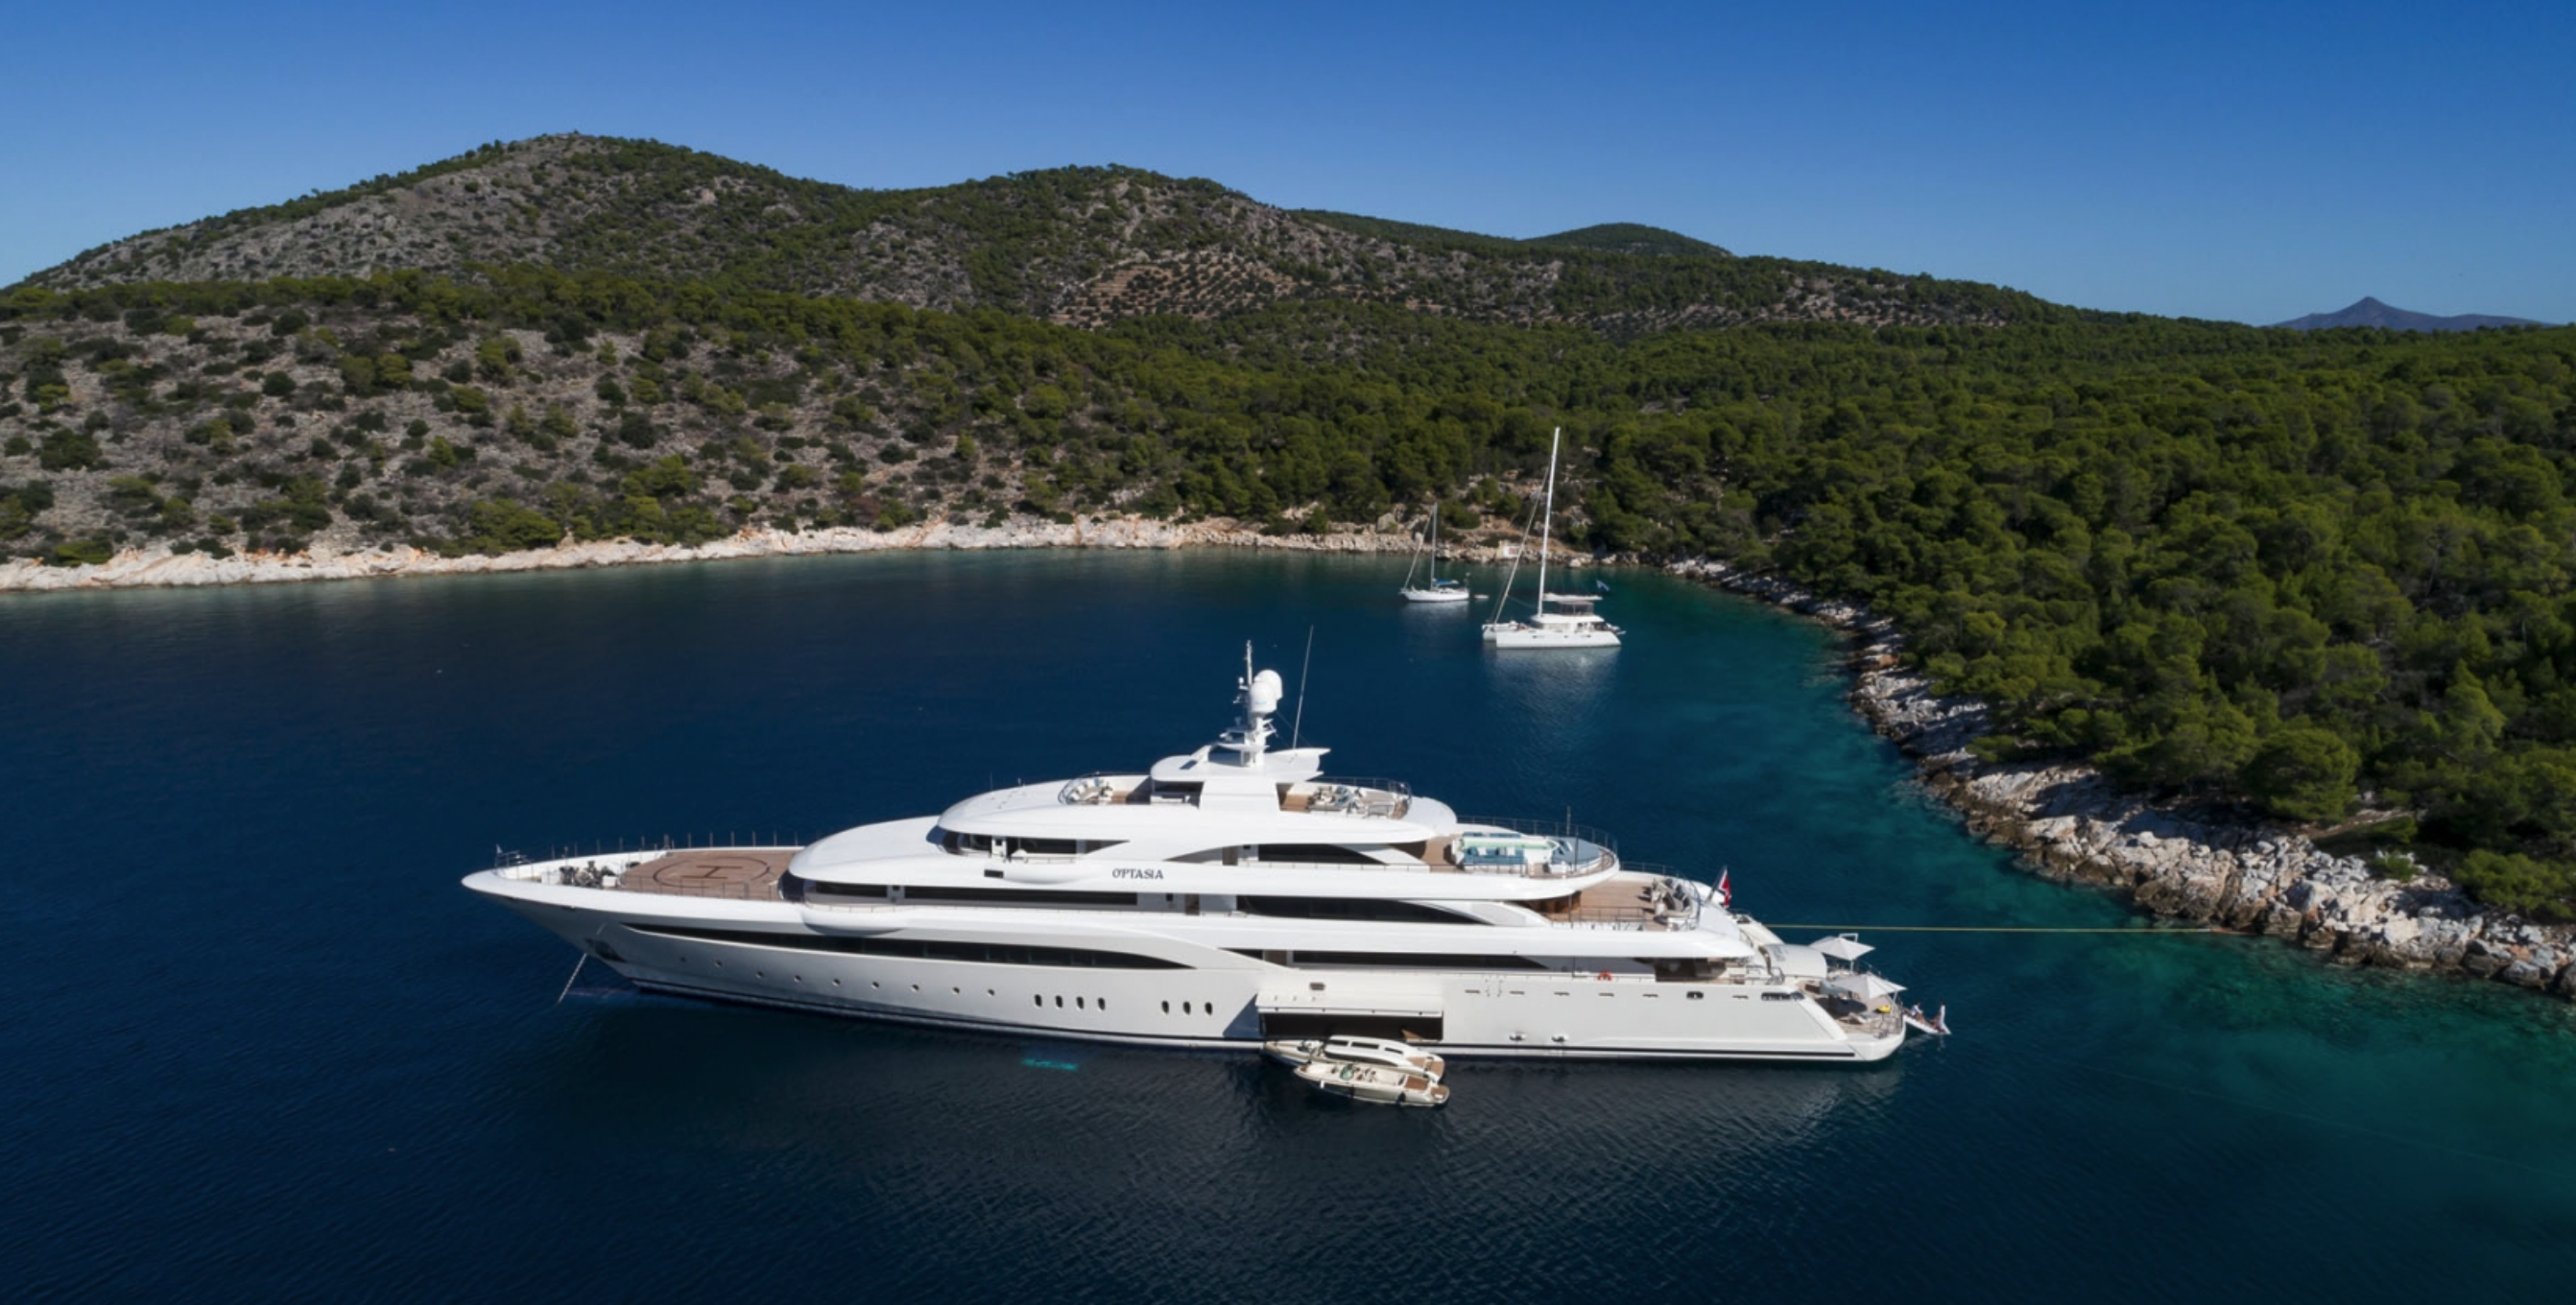 O’Ptasia - Yacht Charter Mykonos & Boat hire in East Mediterranean 1